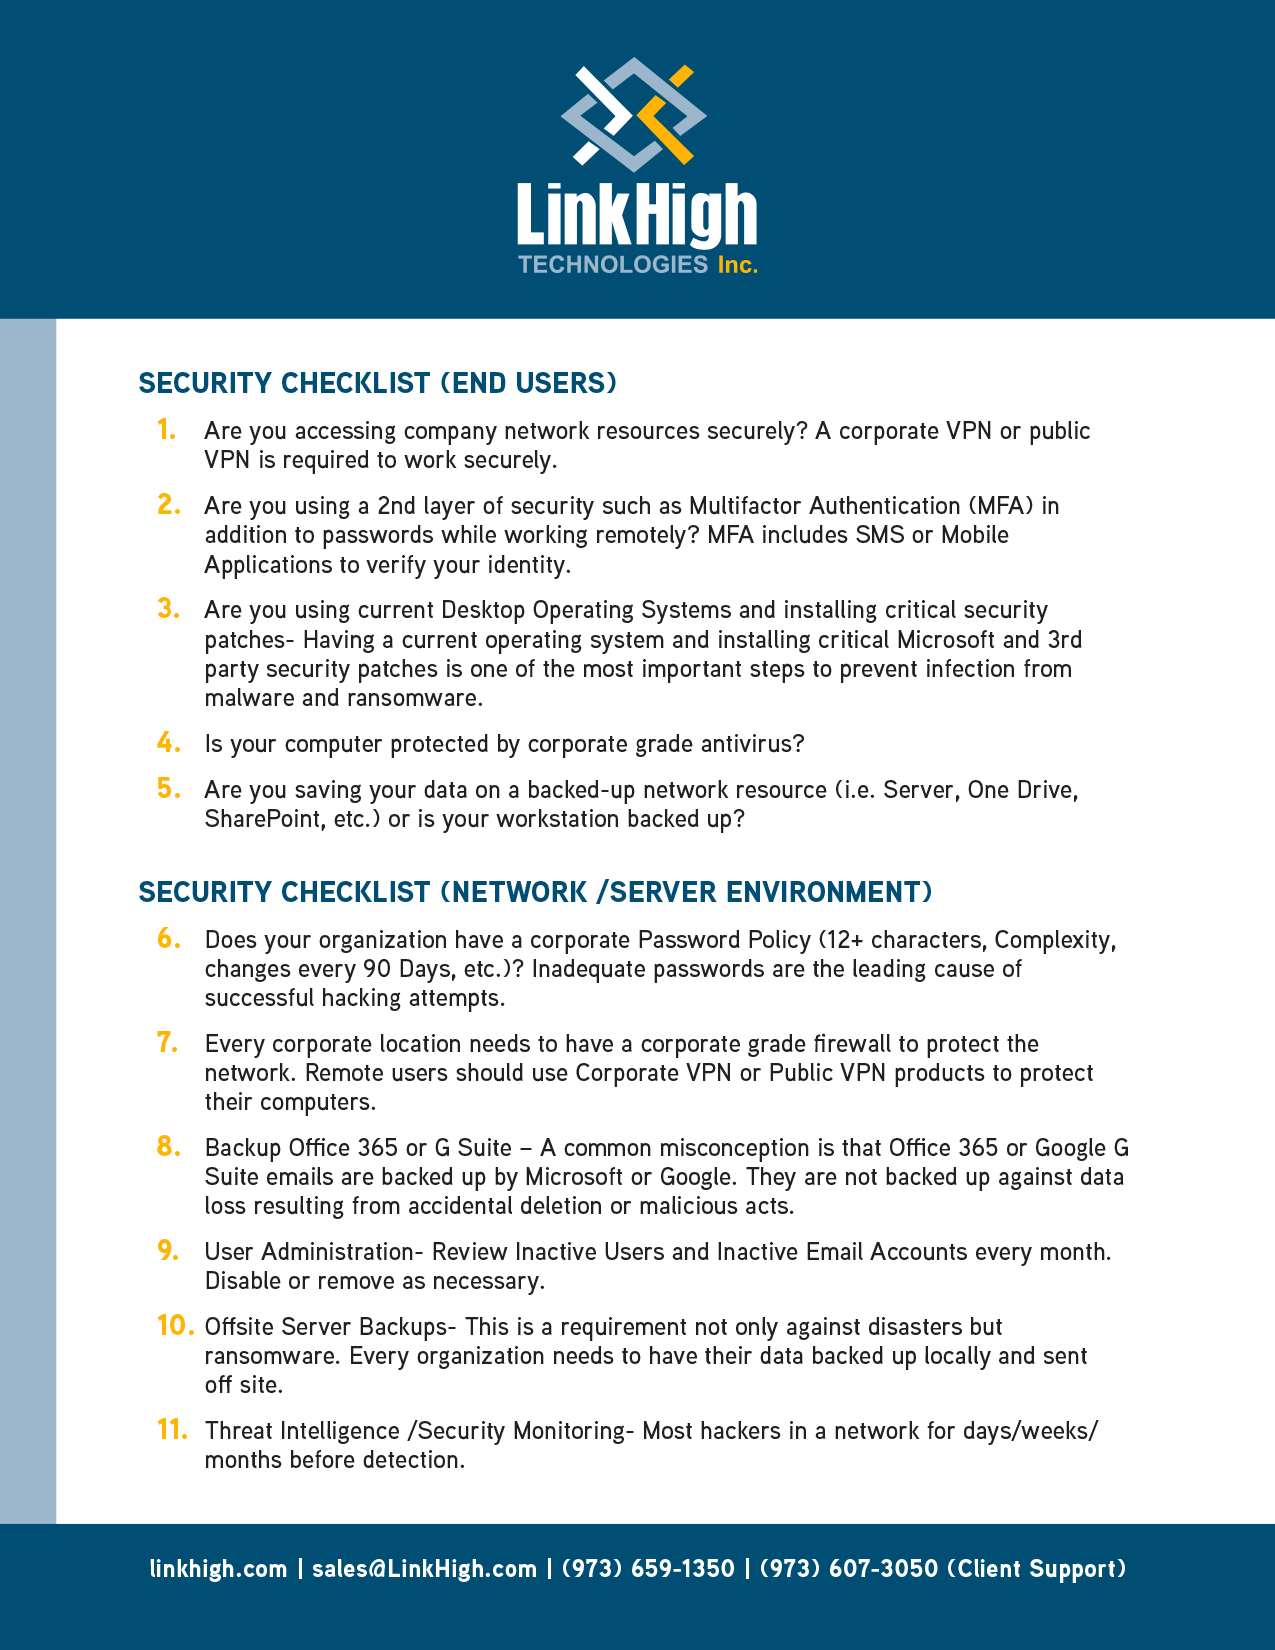 1-sheet document designed for LinkHigh Technologies, Inc by Sitka Creations.